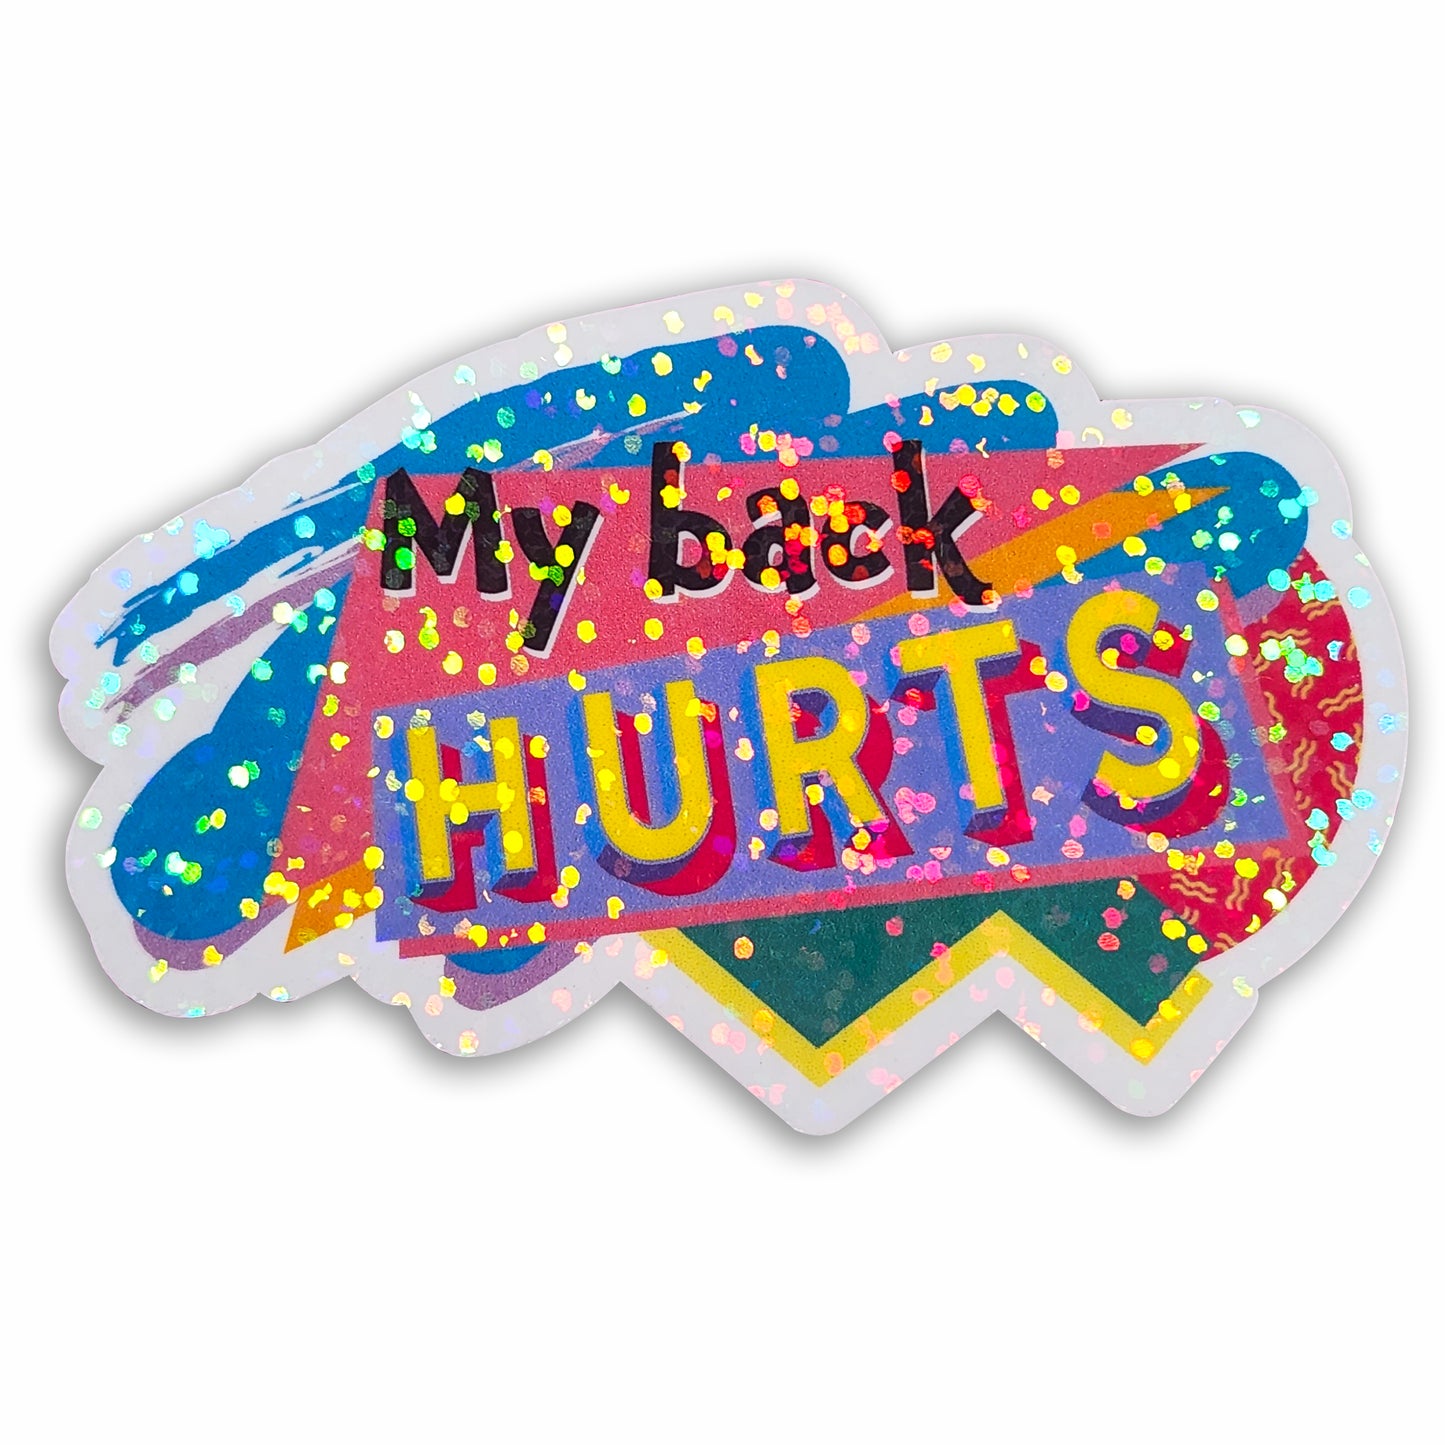 My Back Hurts Holographic 90s Sticker, 3.5x2 in. – Pretty Rude Embroidery